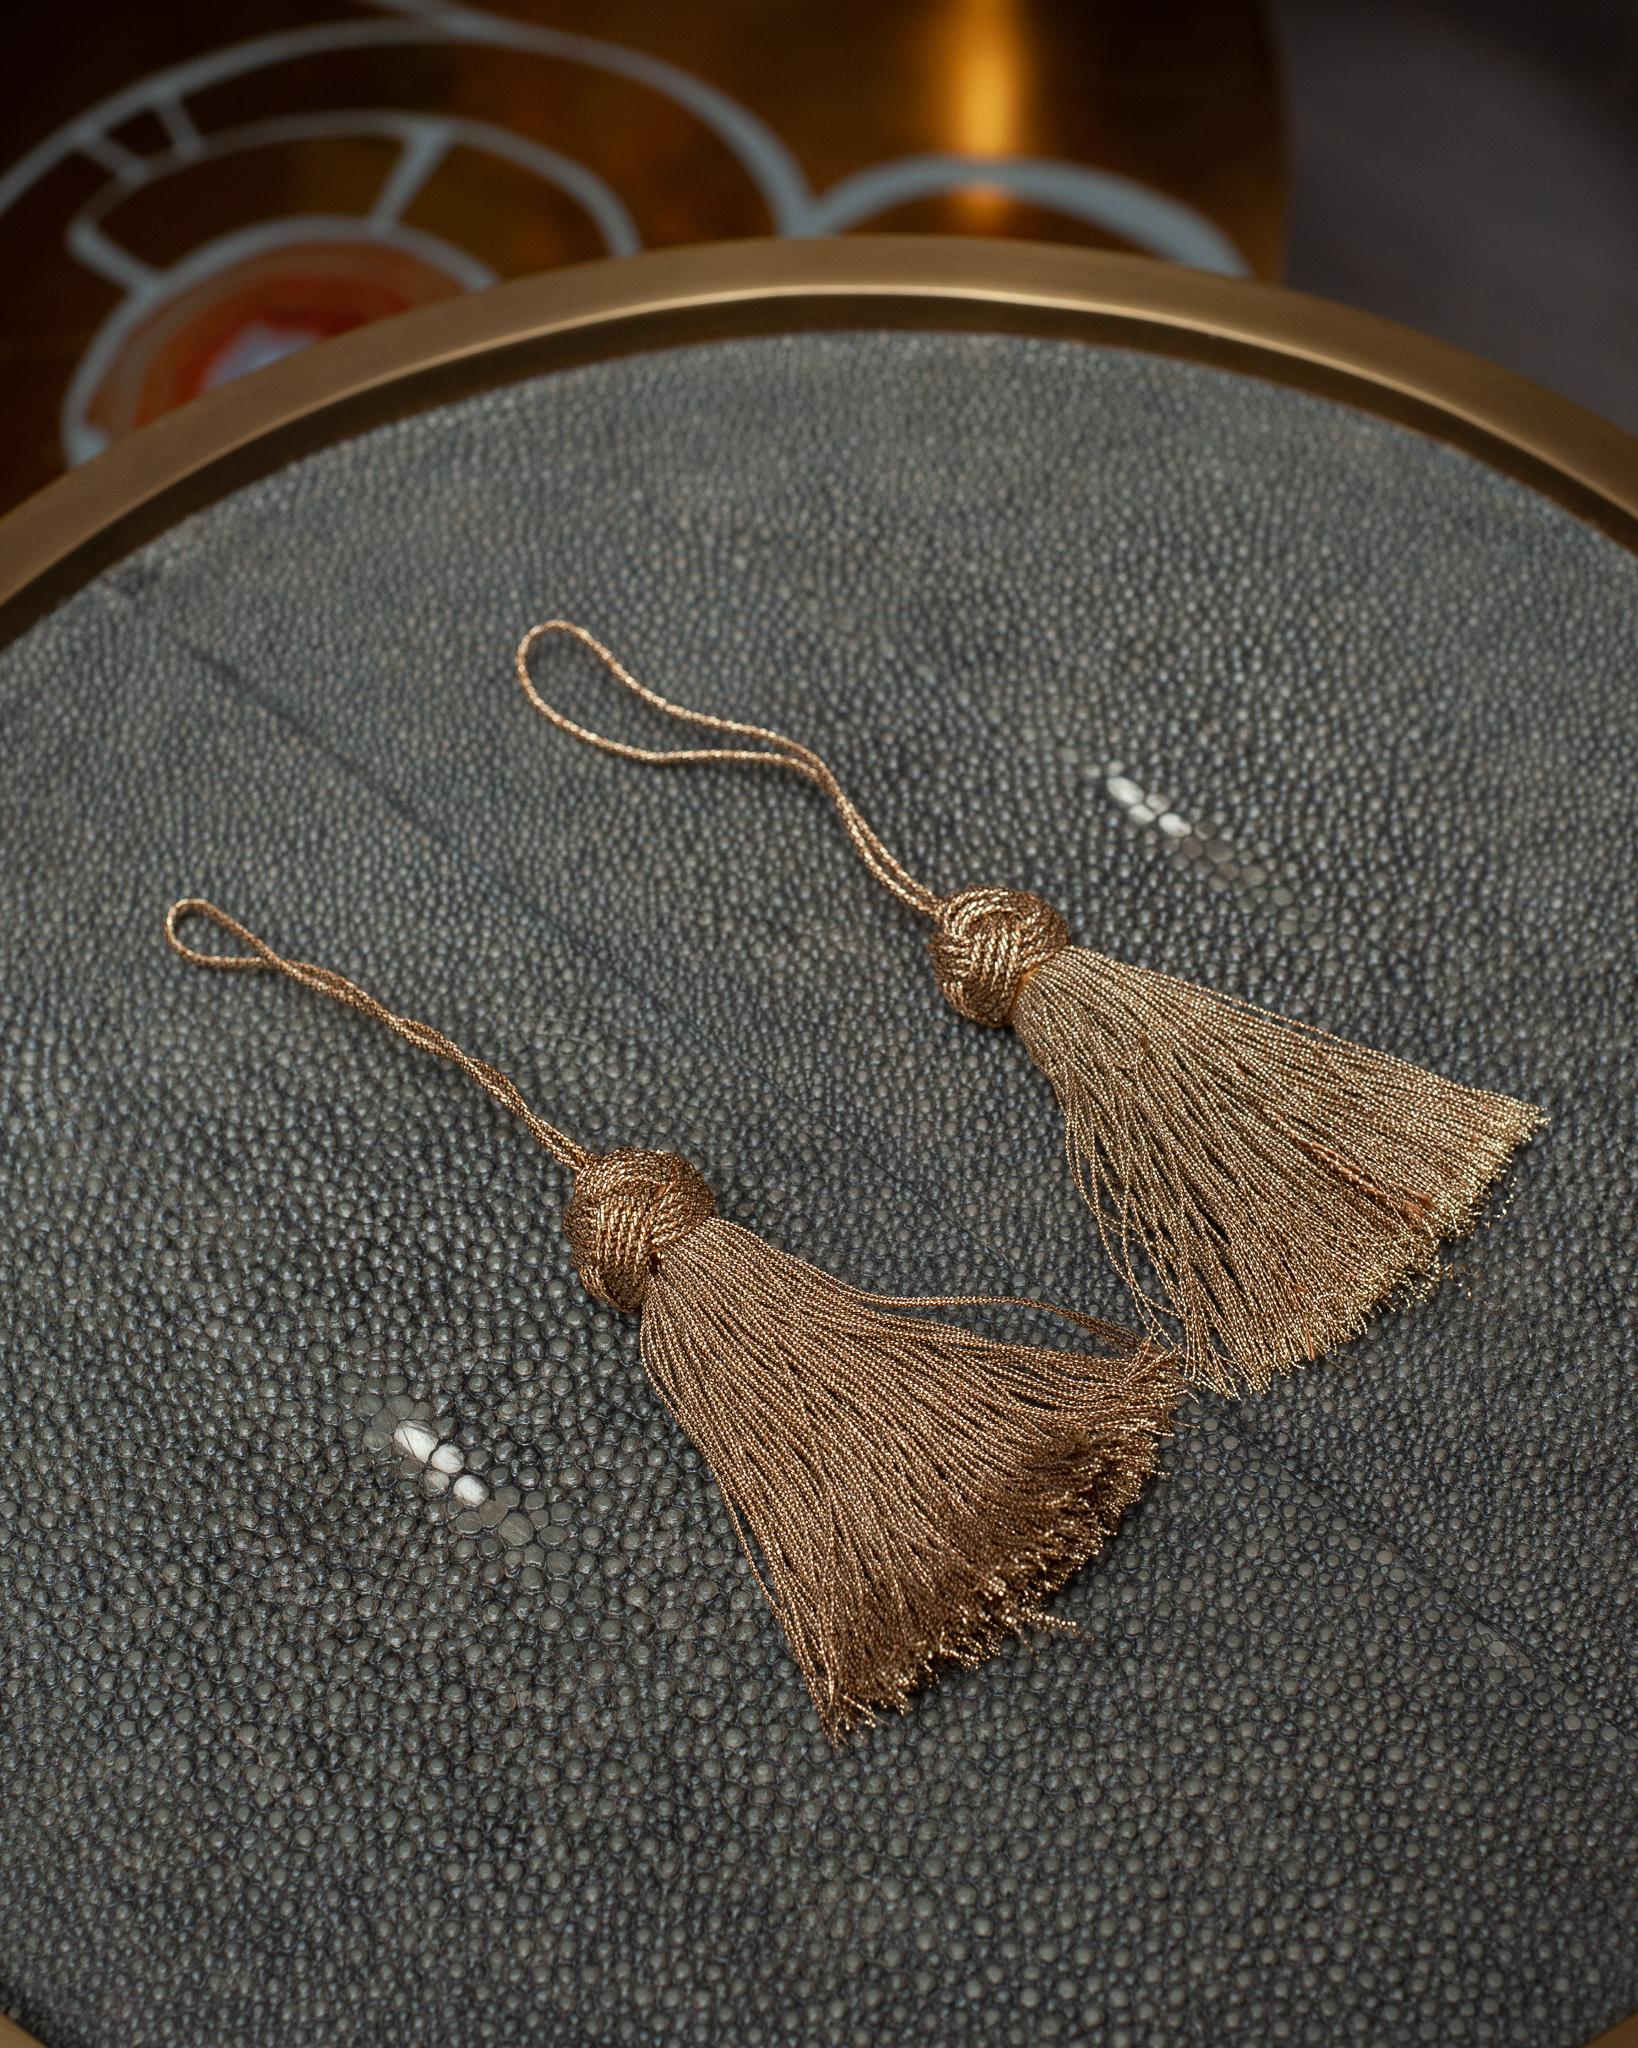 A beautiful pair of metallic silk tassels, from Bevilacqua Italy. Established by Luigi Bevilacqua, and operating out of Venice since 1875, Bevilacqua Tessuti produces the most exquisite handwoven fabrics available out of Europe following ancient